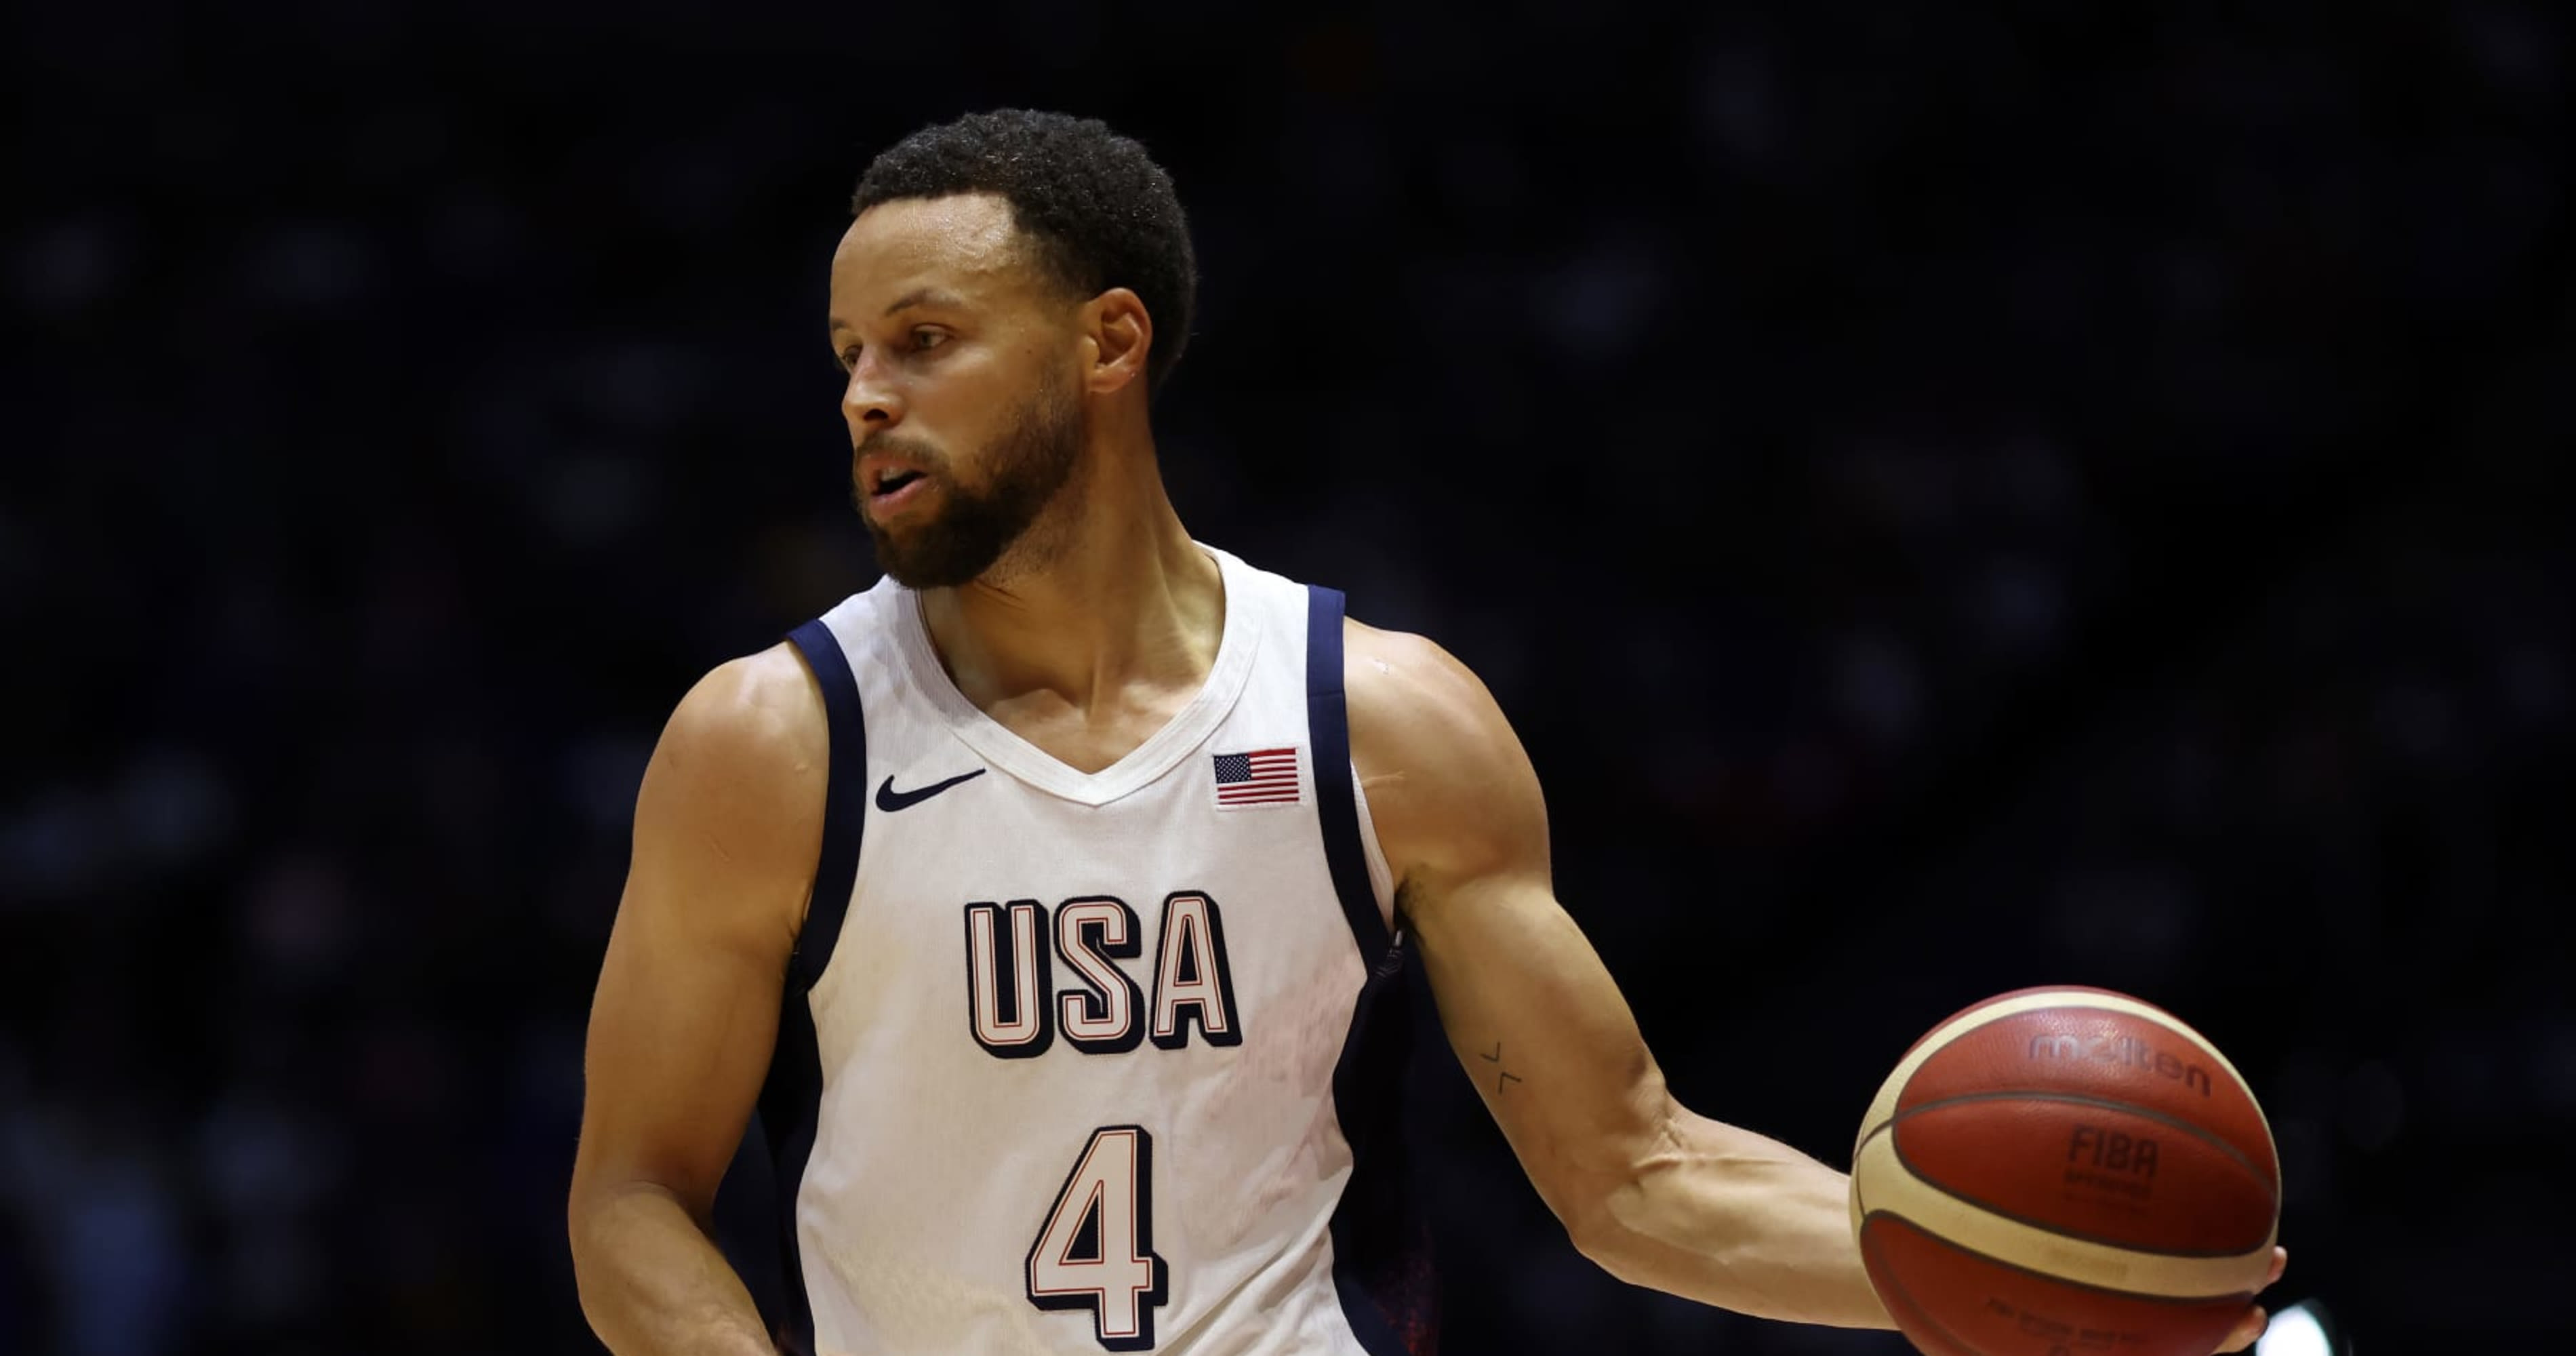 Steph Curry Talks 2012 Team USA Olympic Snub: 'Wasn't on the Level I Needed to Be'